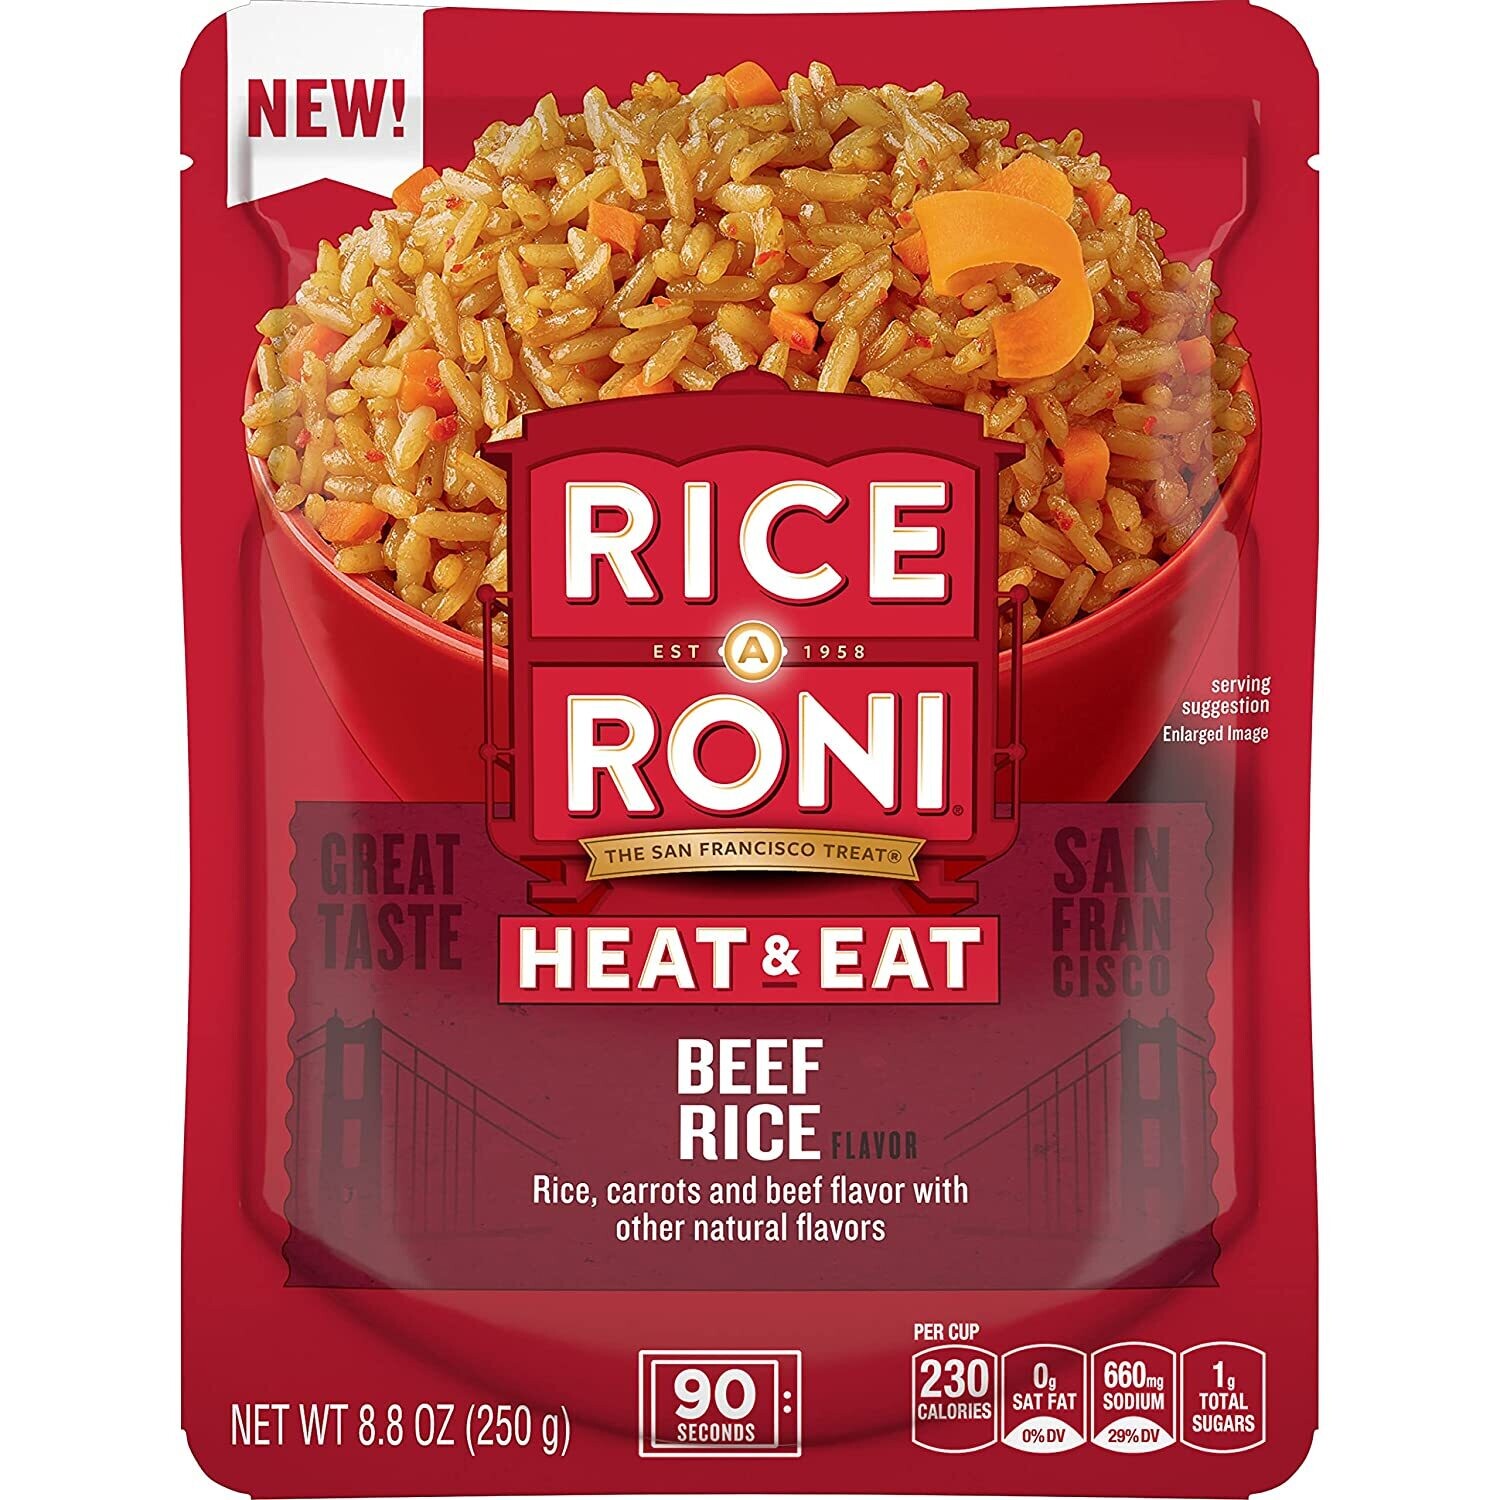 Rice-a-Roni Heat & Eat Rice Microwavable Pouch - Beef Rice